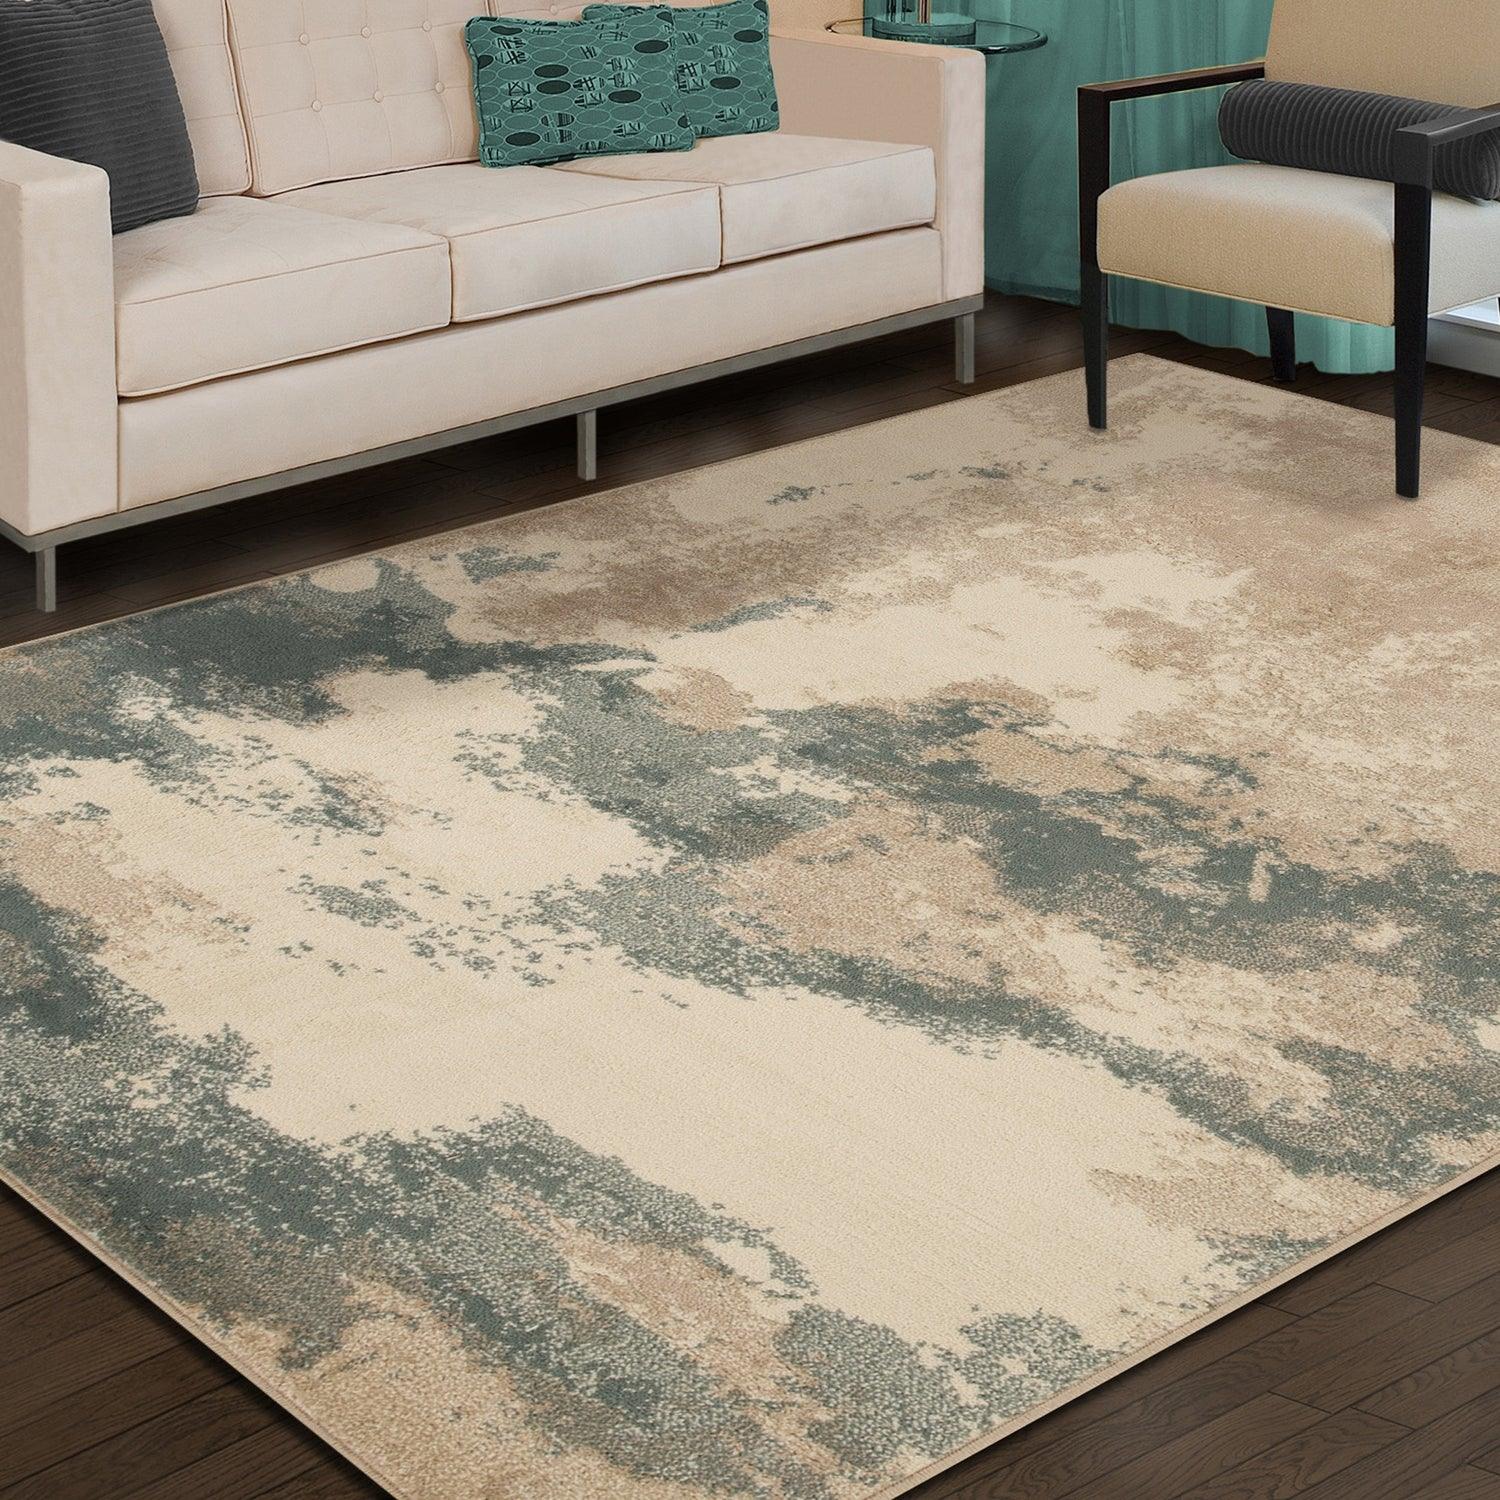 Eclectic Multi-Tone Abstract Rug or Runner - Blue